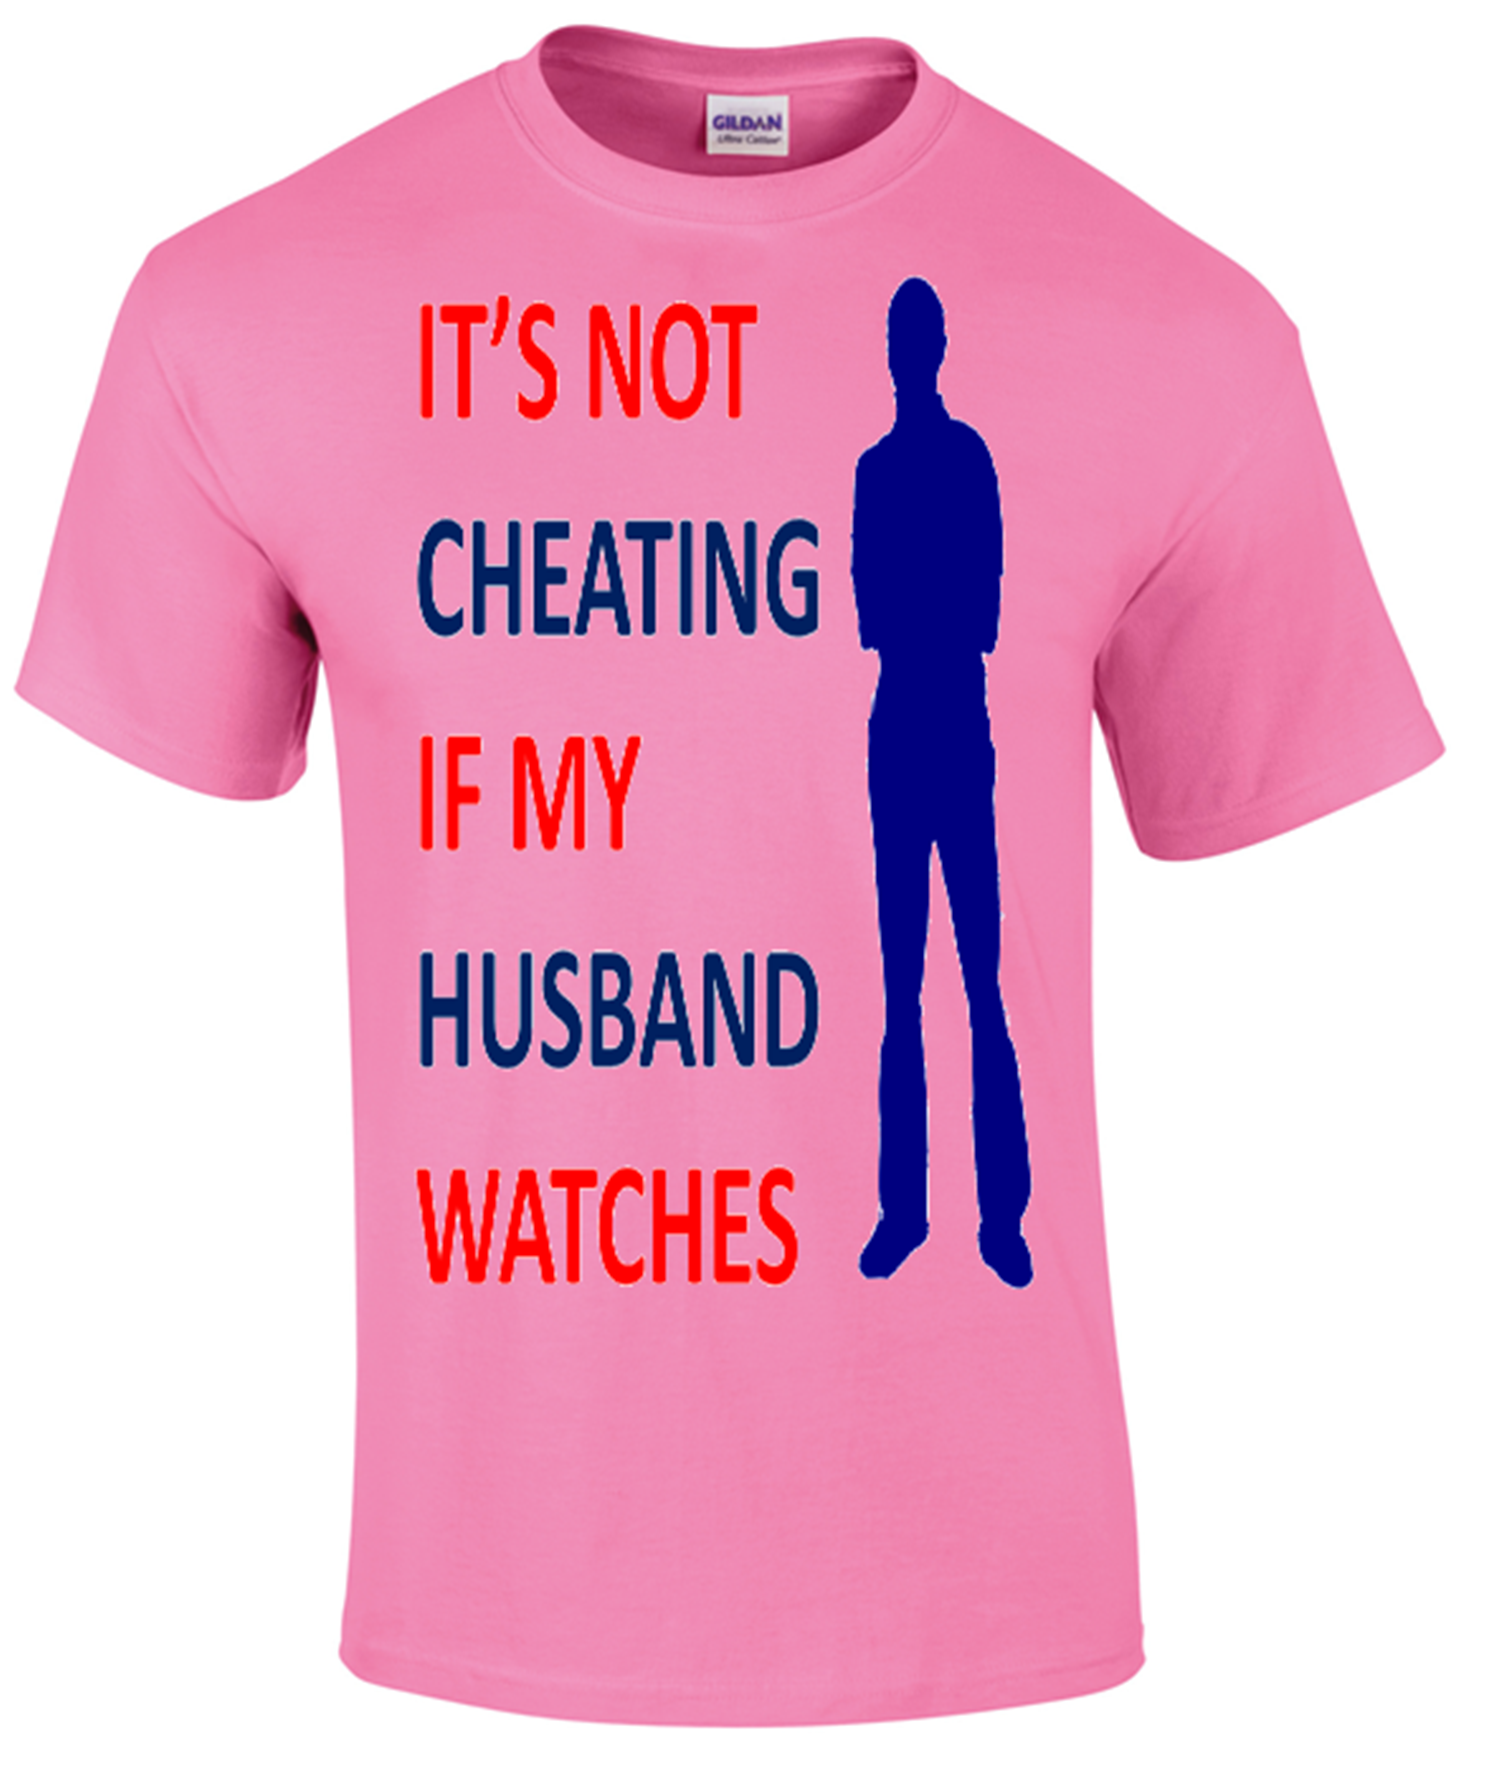 IT’S NOT CHEATING IF MY ??????? WATCHES - Army 1157 kit S / HUSBAND Army 1157 Kit Veterans Owned Business